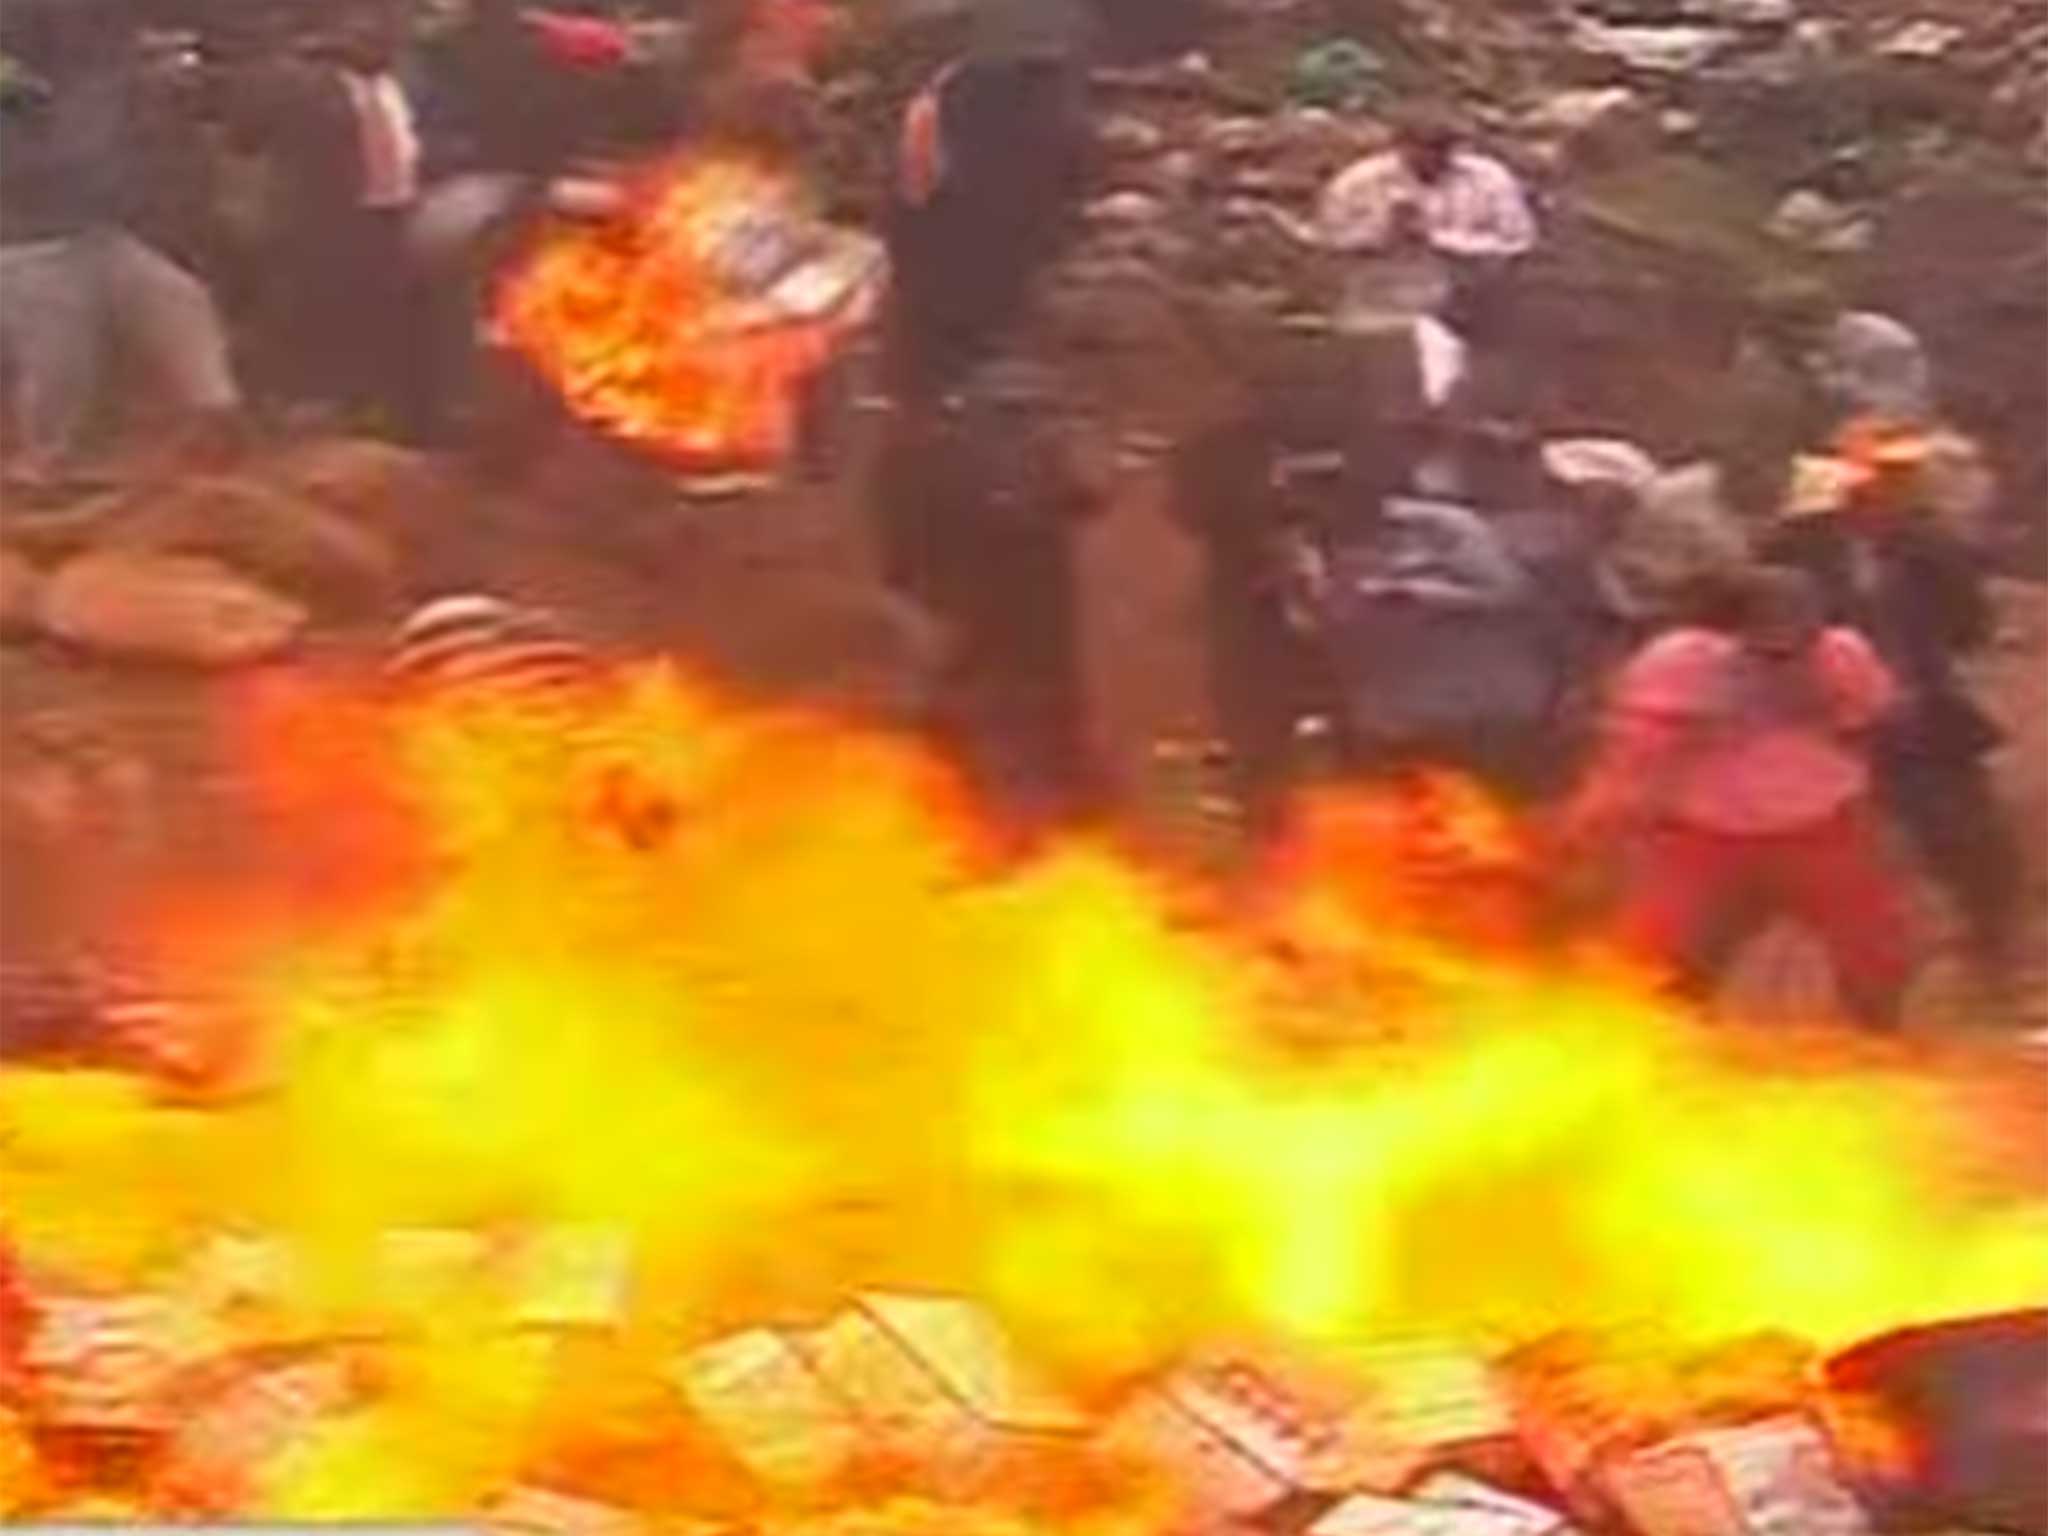 Kiambu governor William Kabogo was forced into an unseemly scramble away from the fire